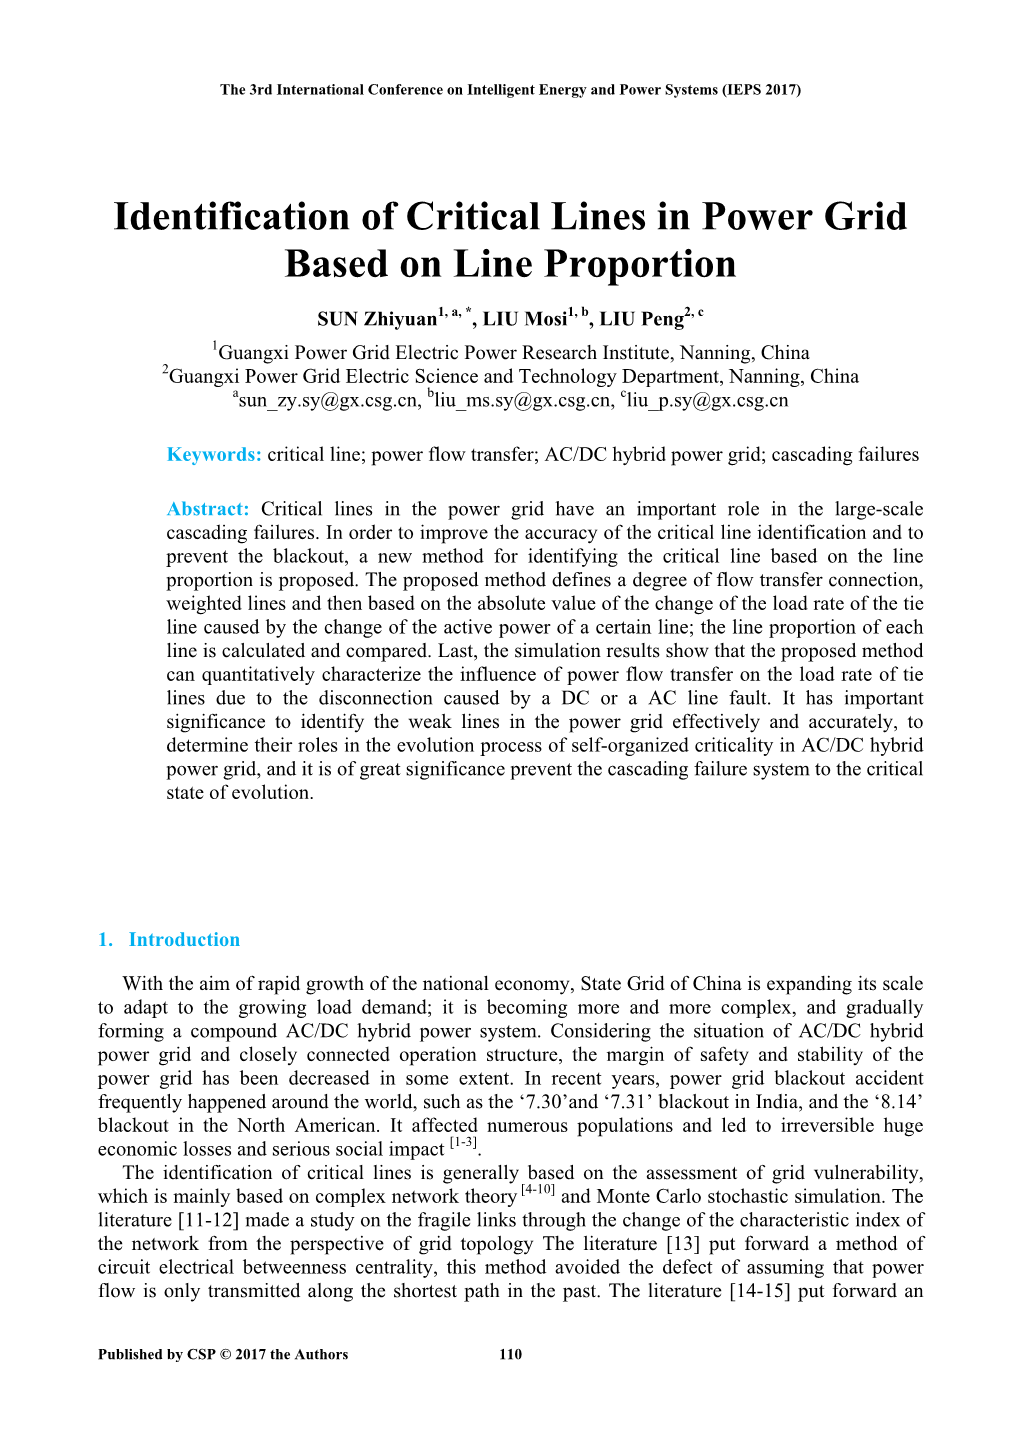 Identification of Critical Lines in Power Grid Based on Line Proportion